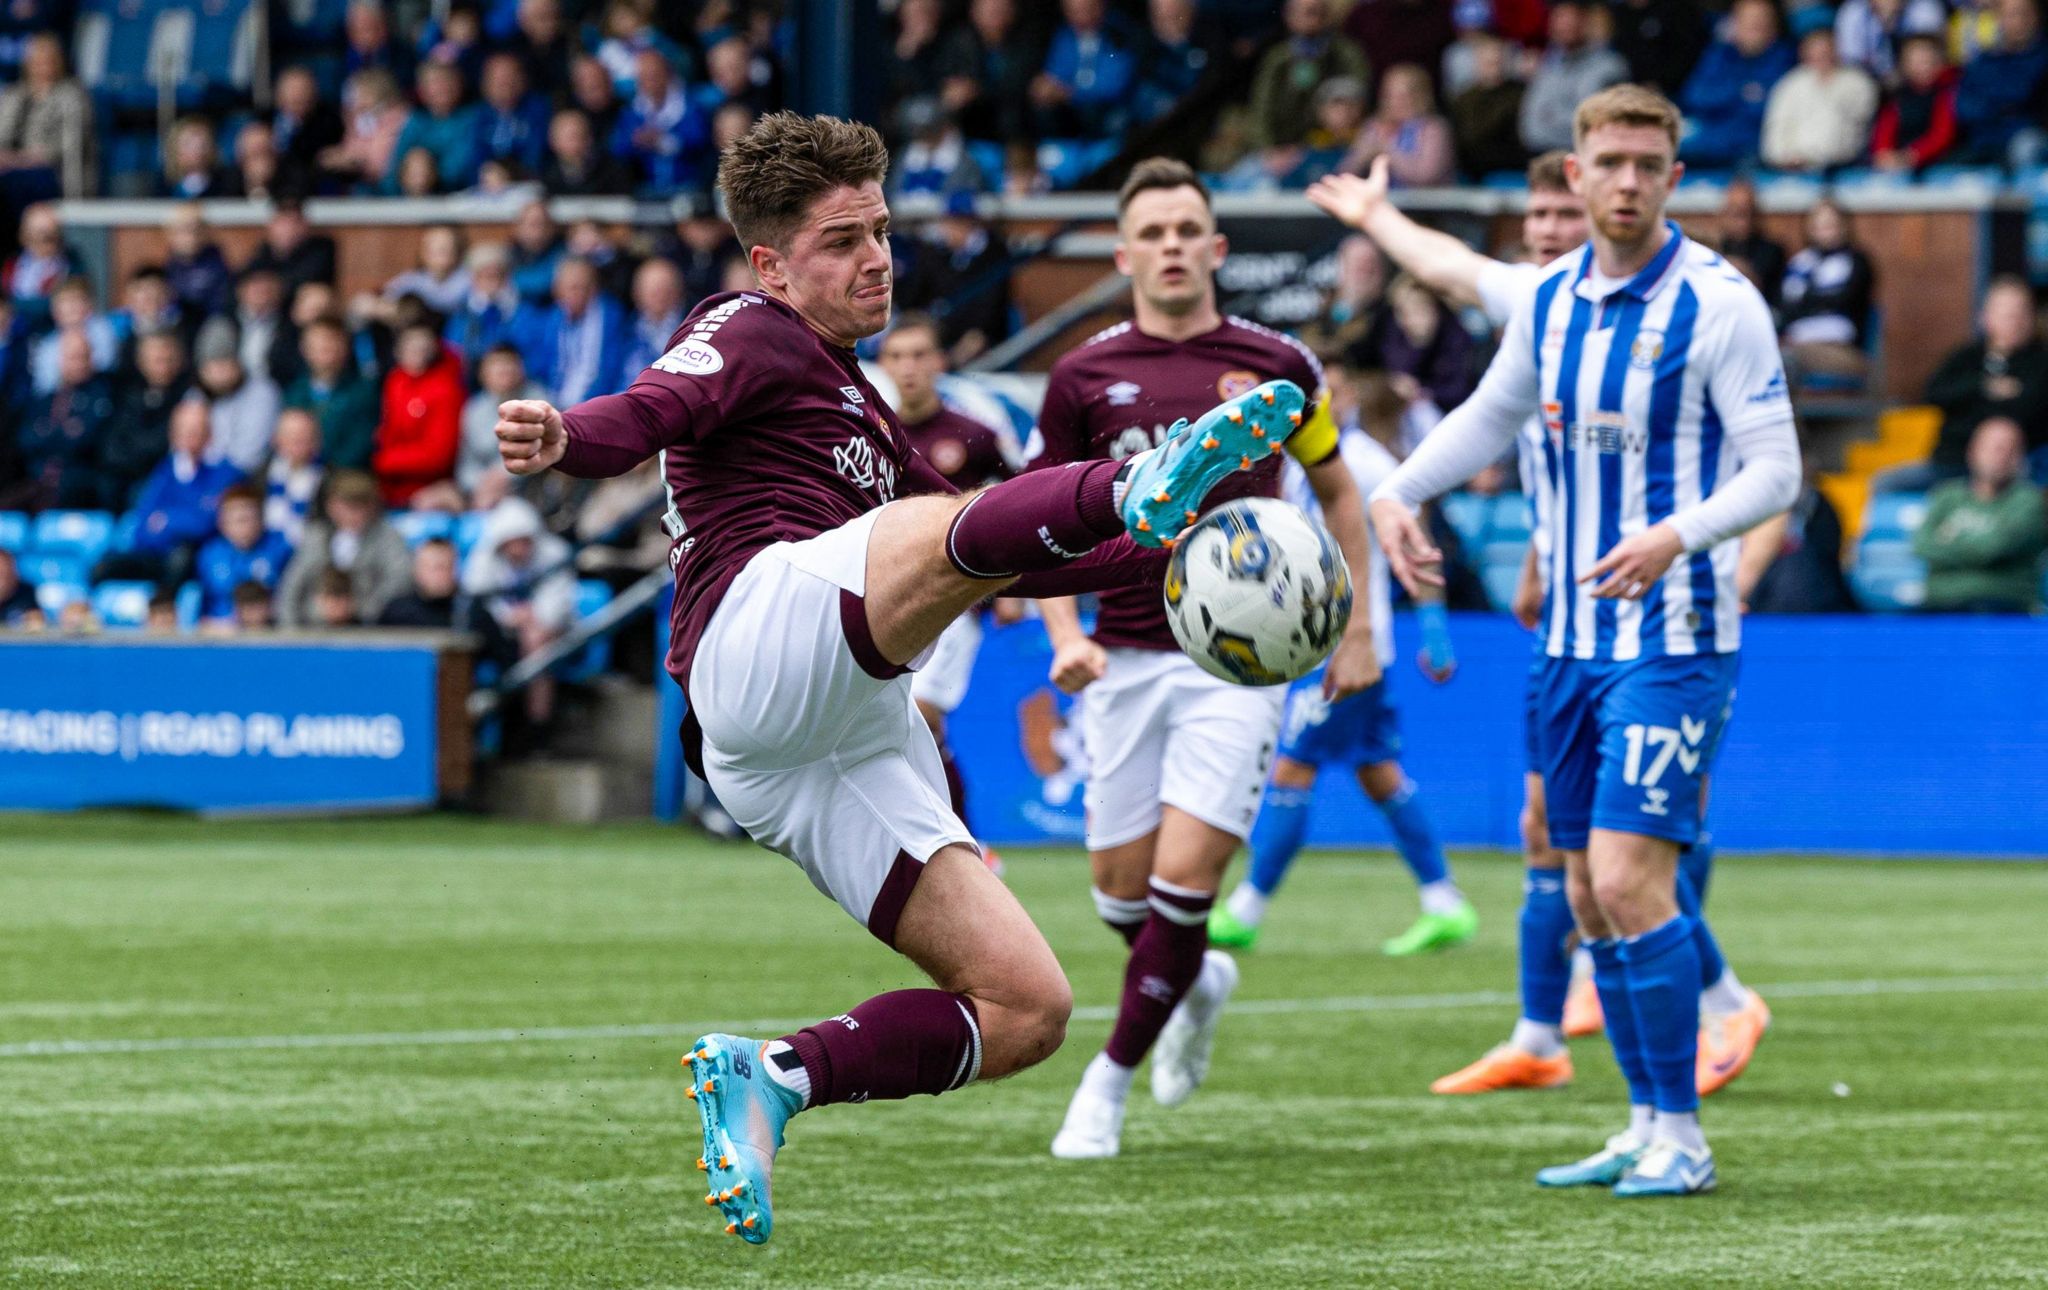 Hearts' Cammy Devlin in action at Rugby Park